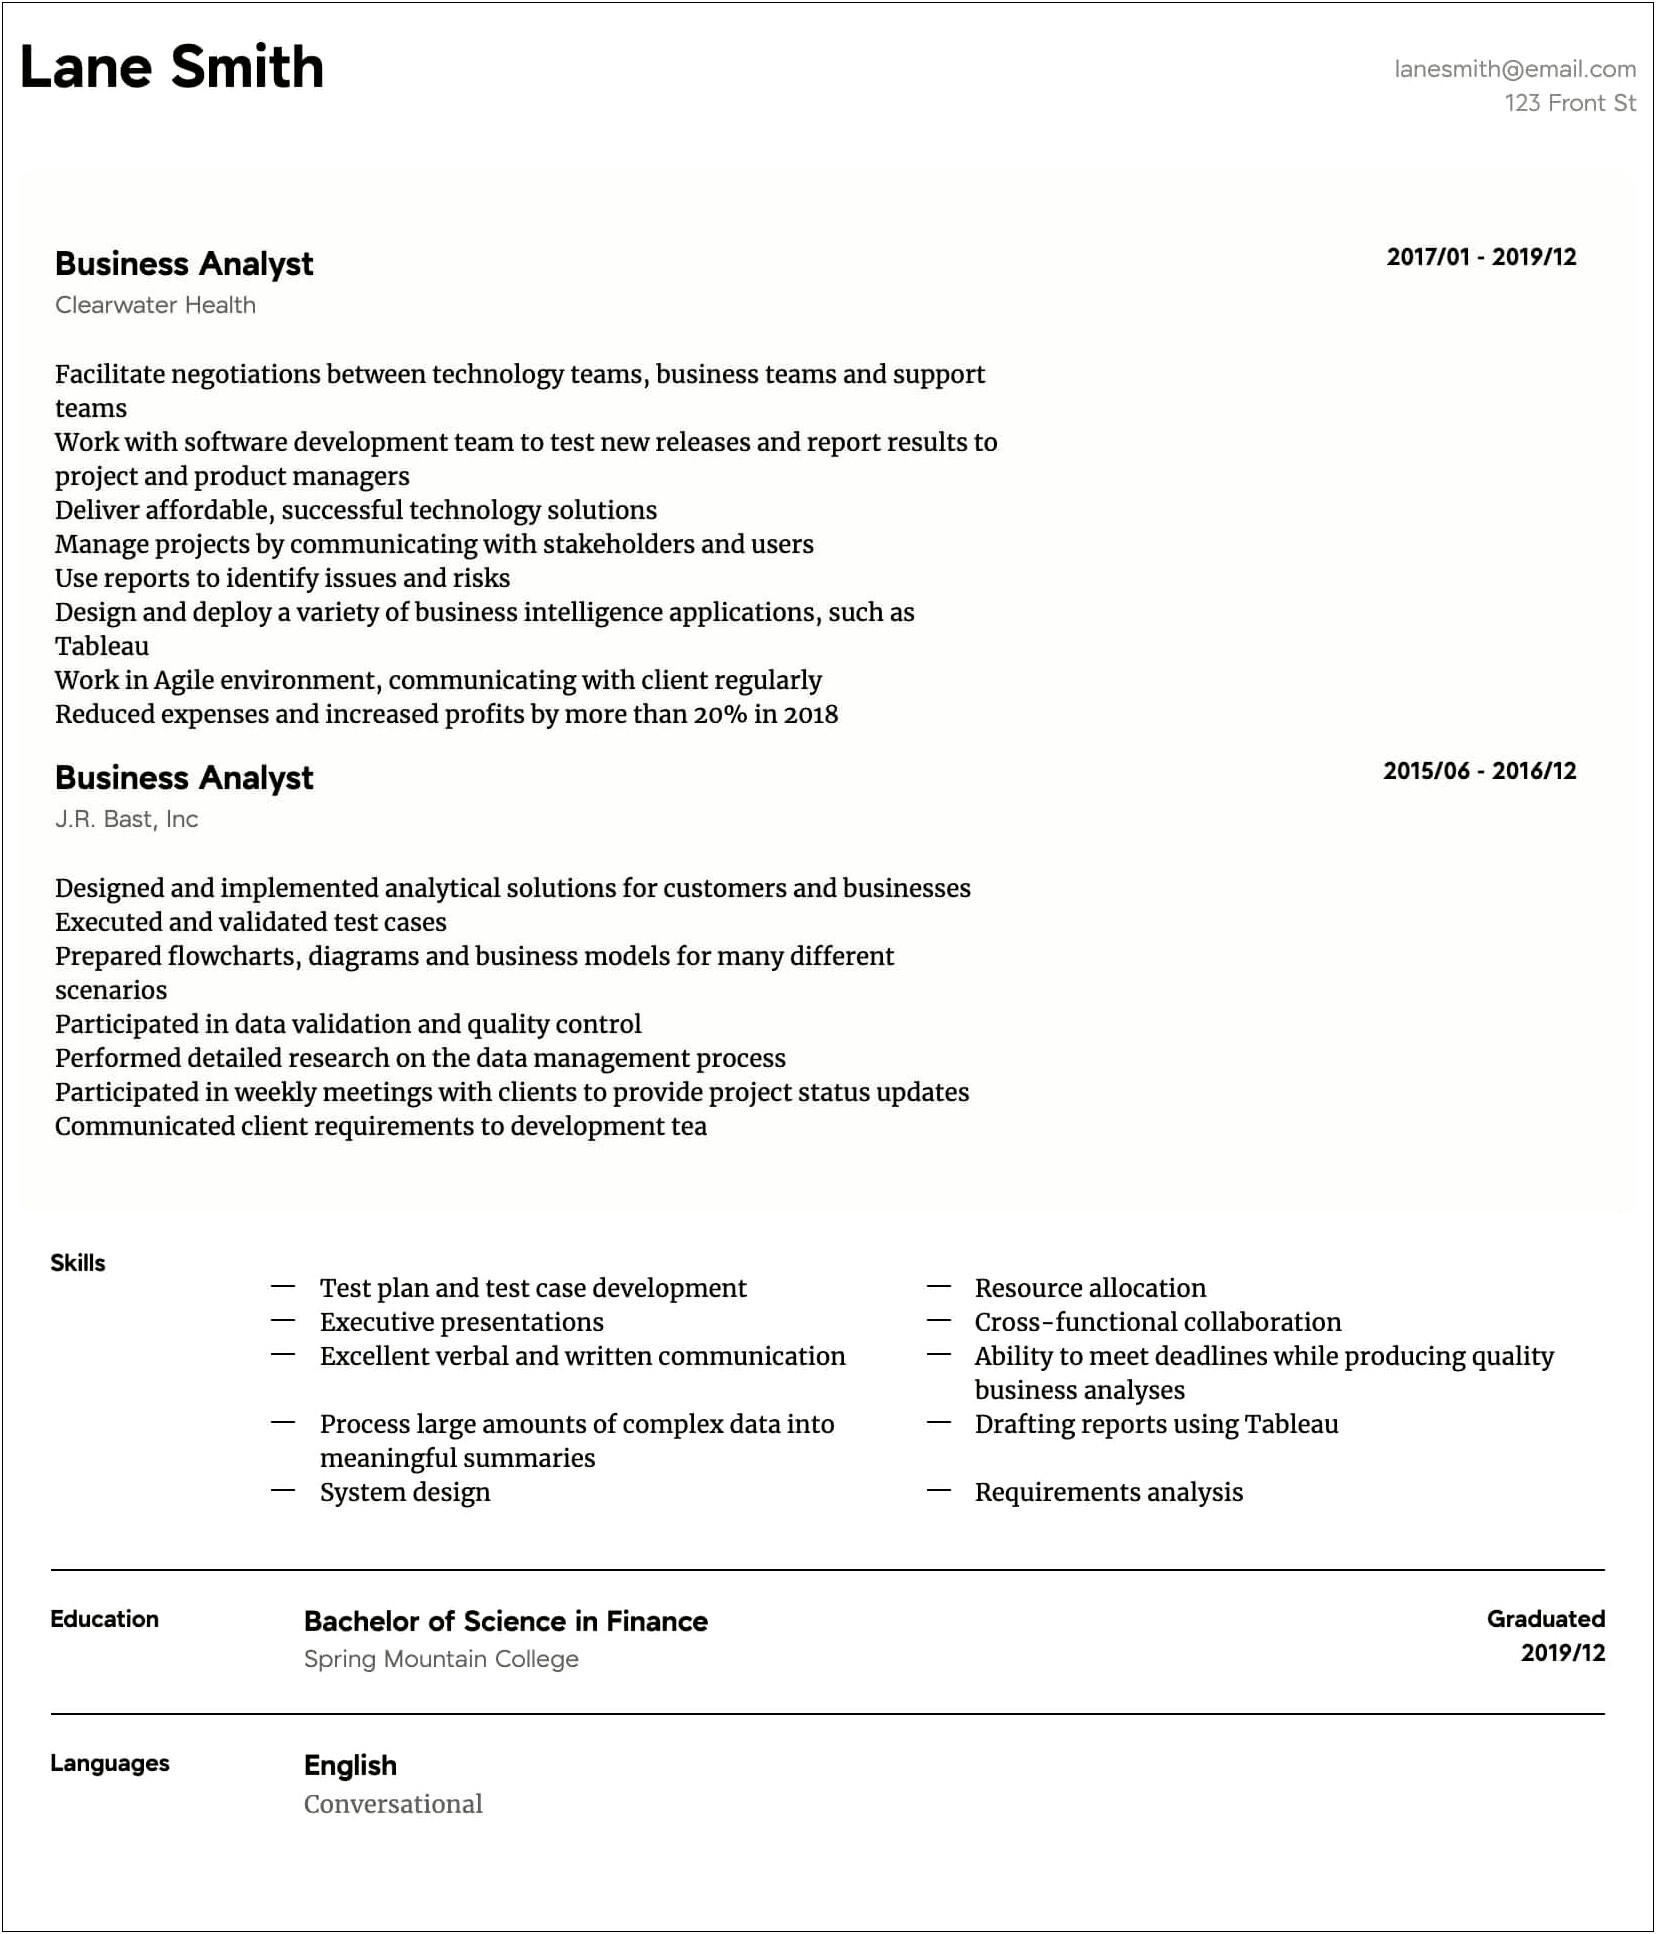 Business Analyst Resume Objective Samples